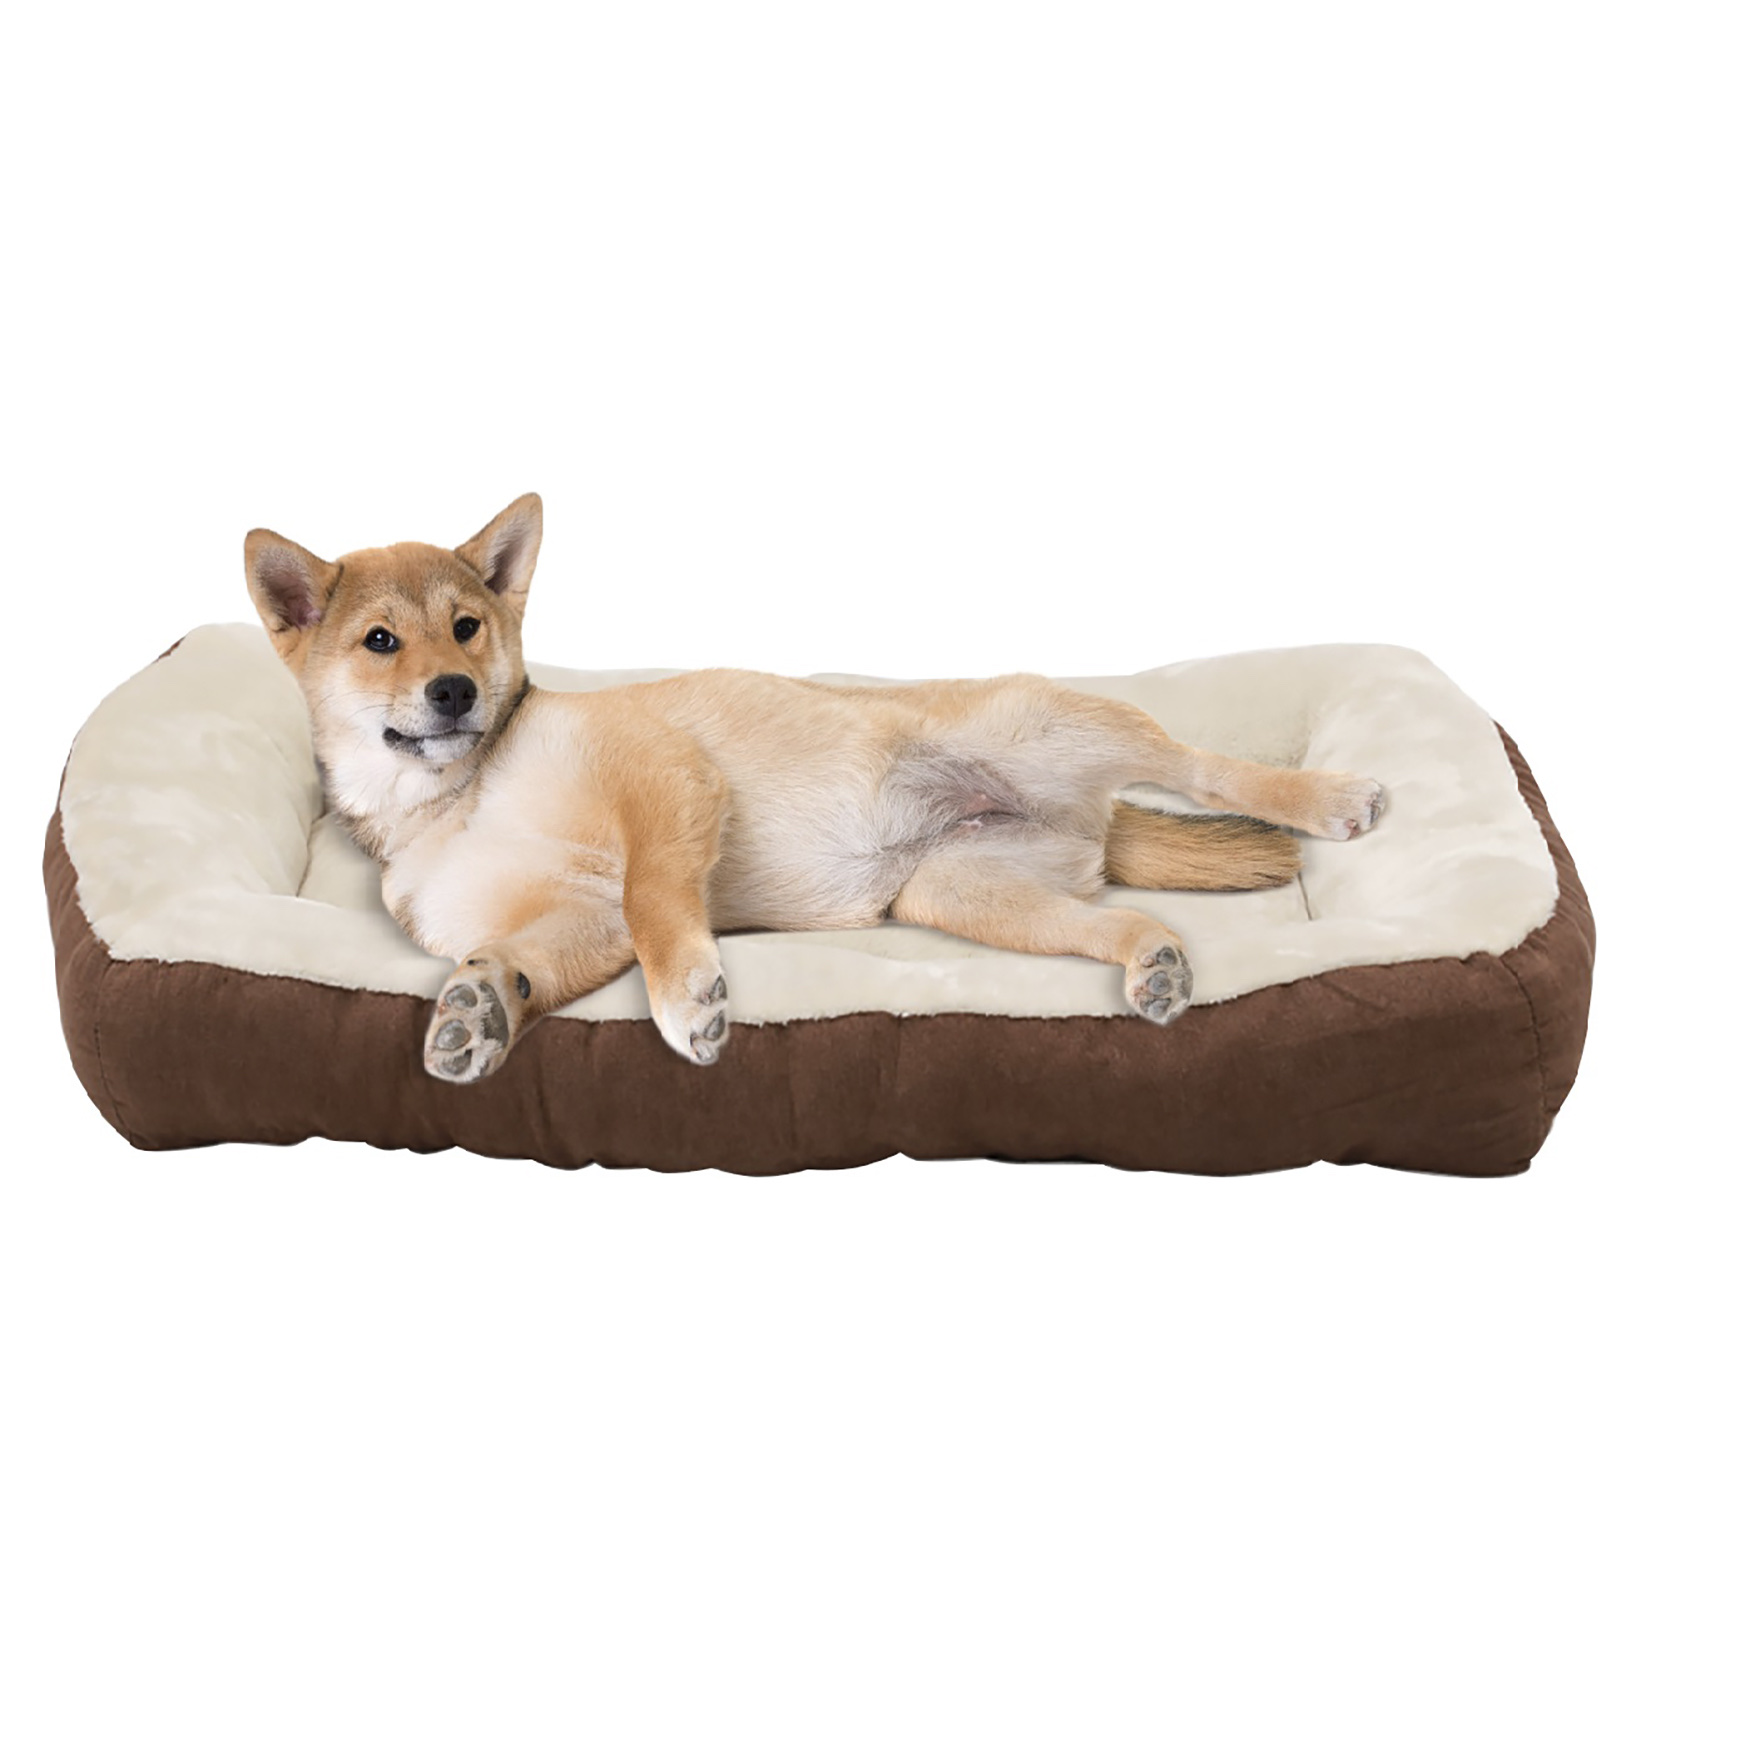 Happycare Tex Rectangle large BROWN bumper pet bed, 40 x 30 inches, high quality plush cover and non-slip buttom, BROWN